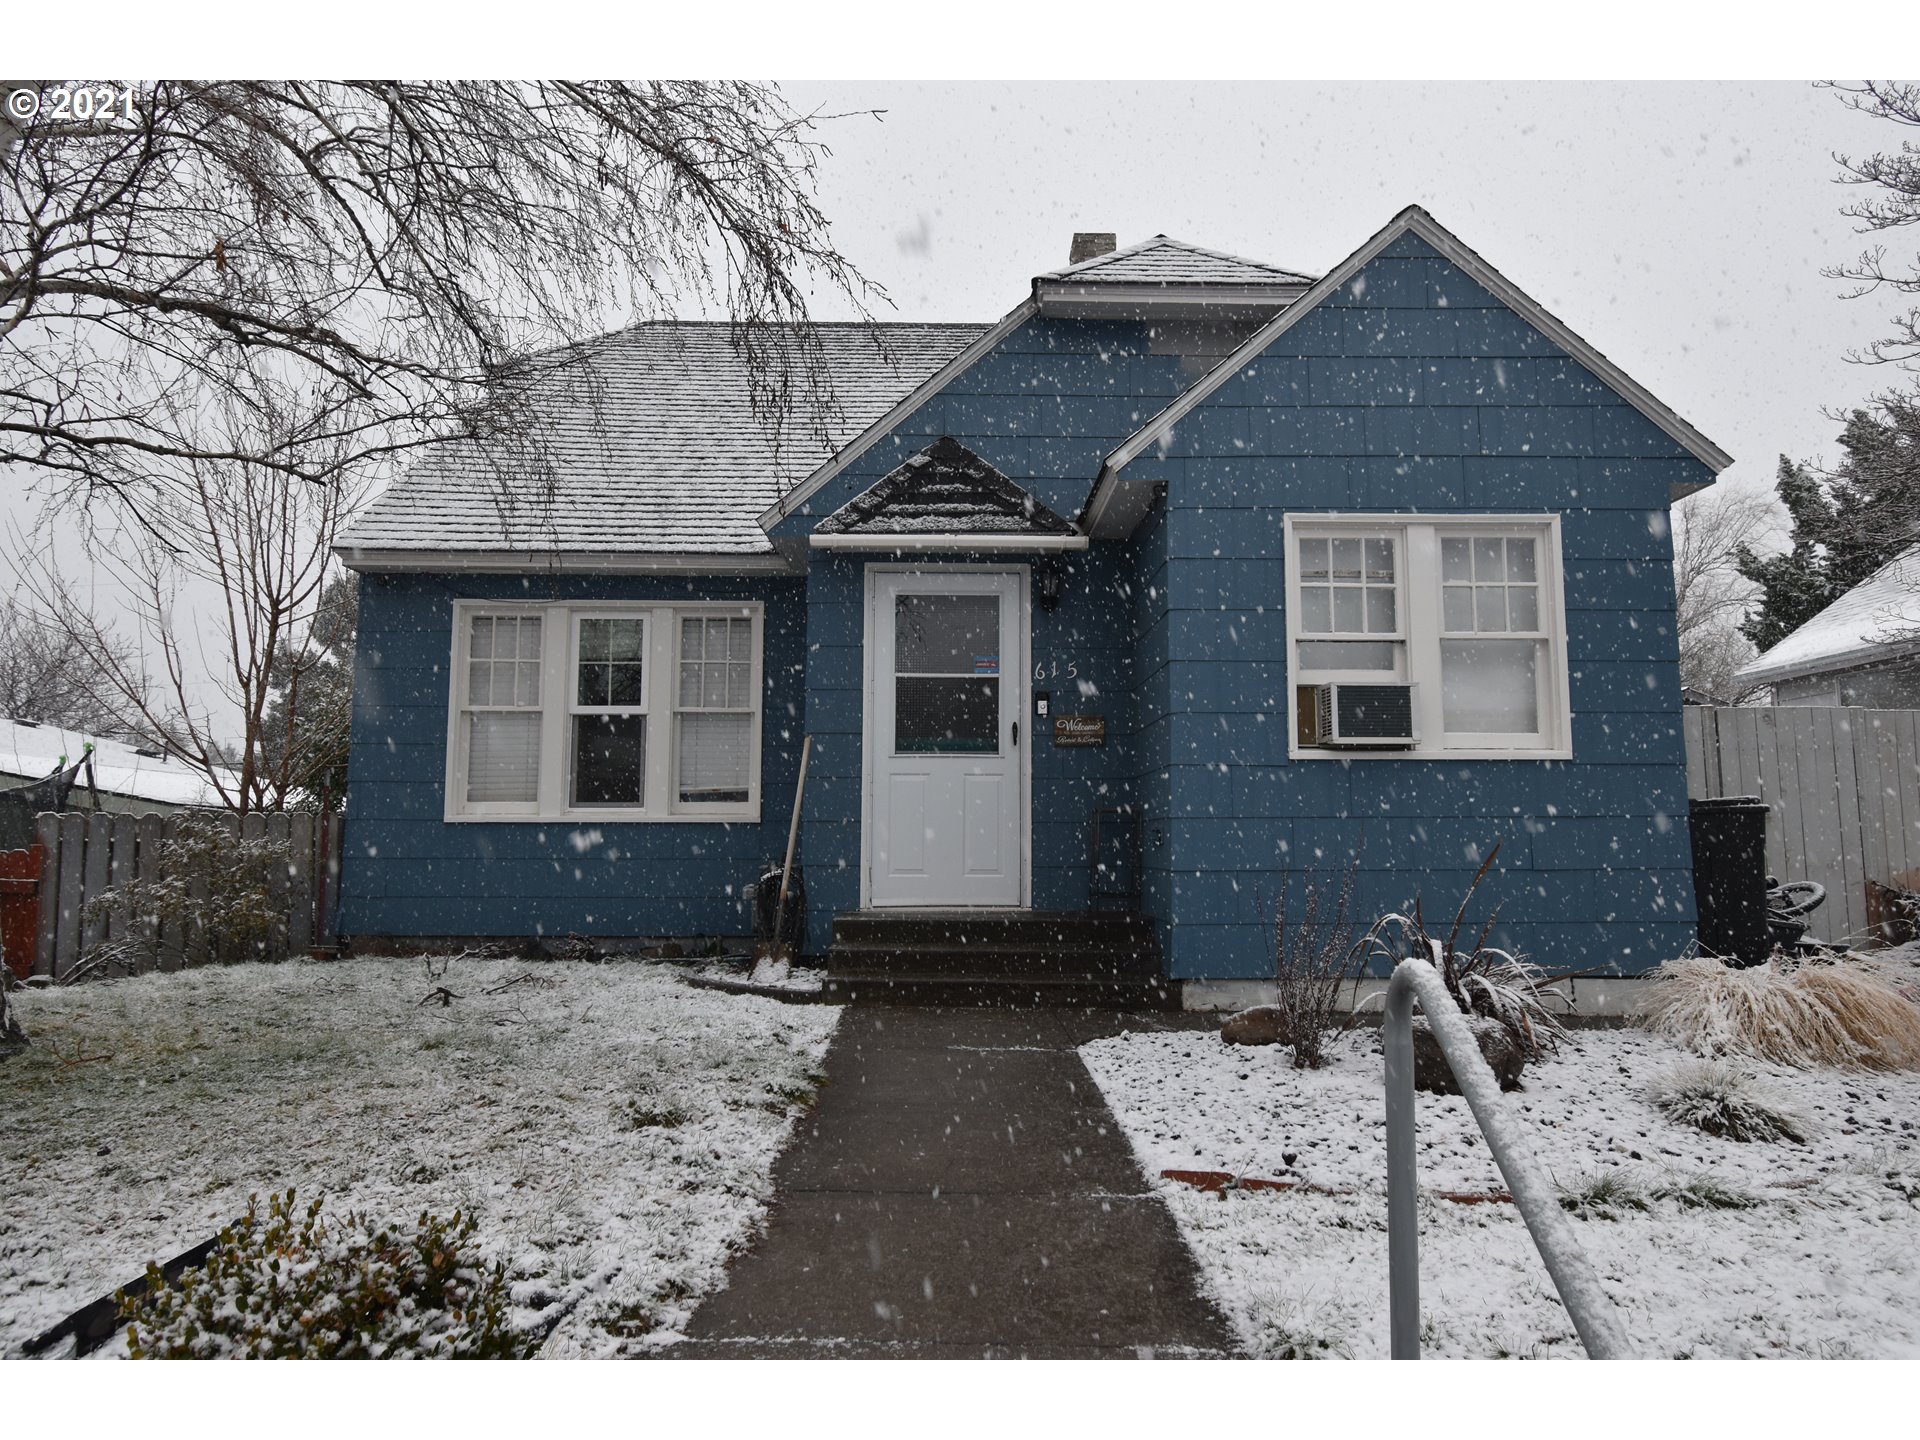 615 W 11TH ST (1 of 1)